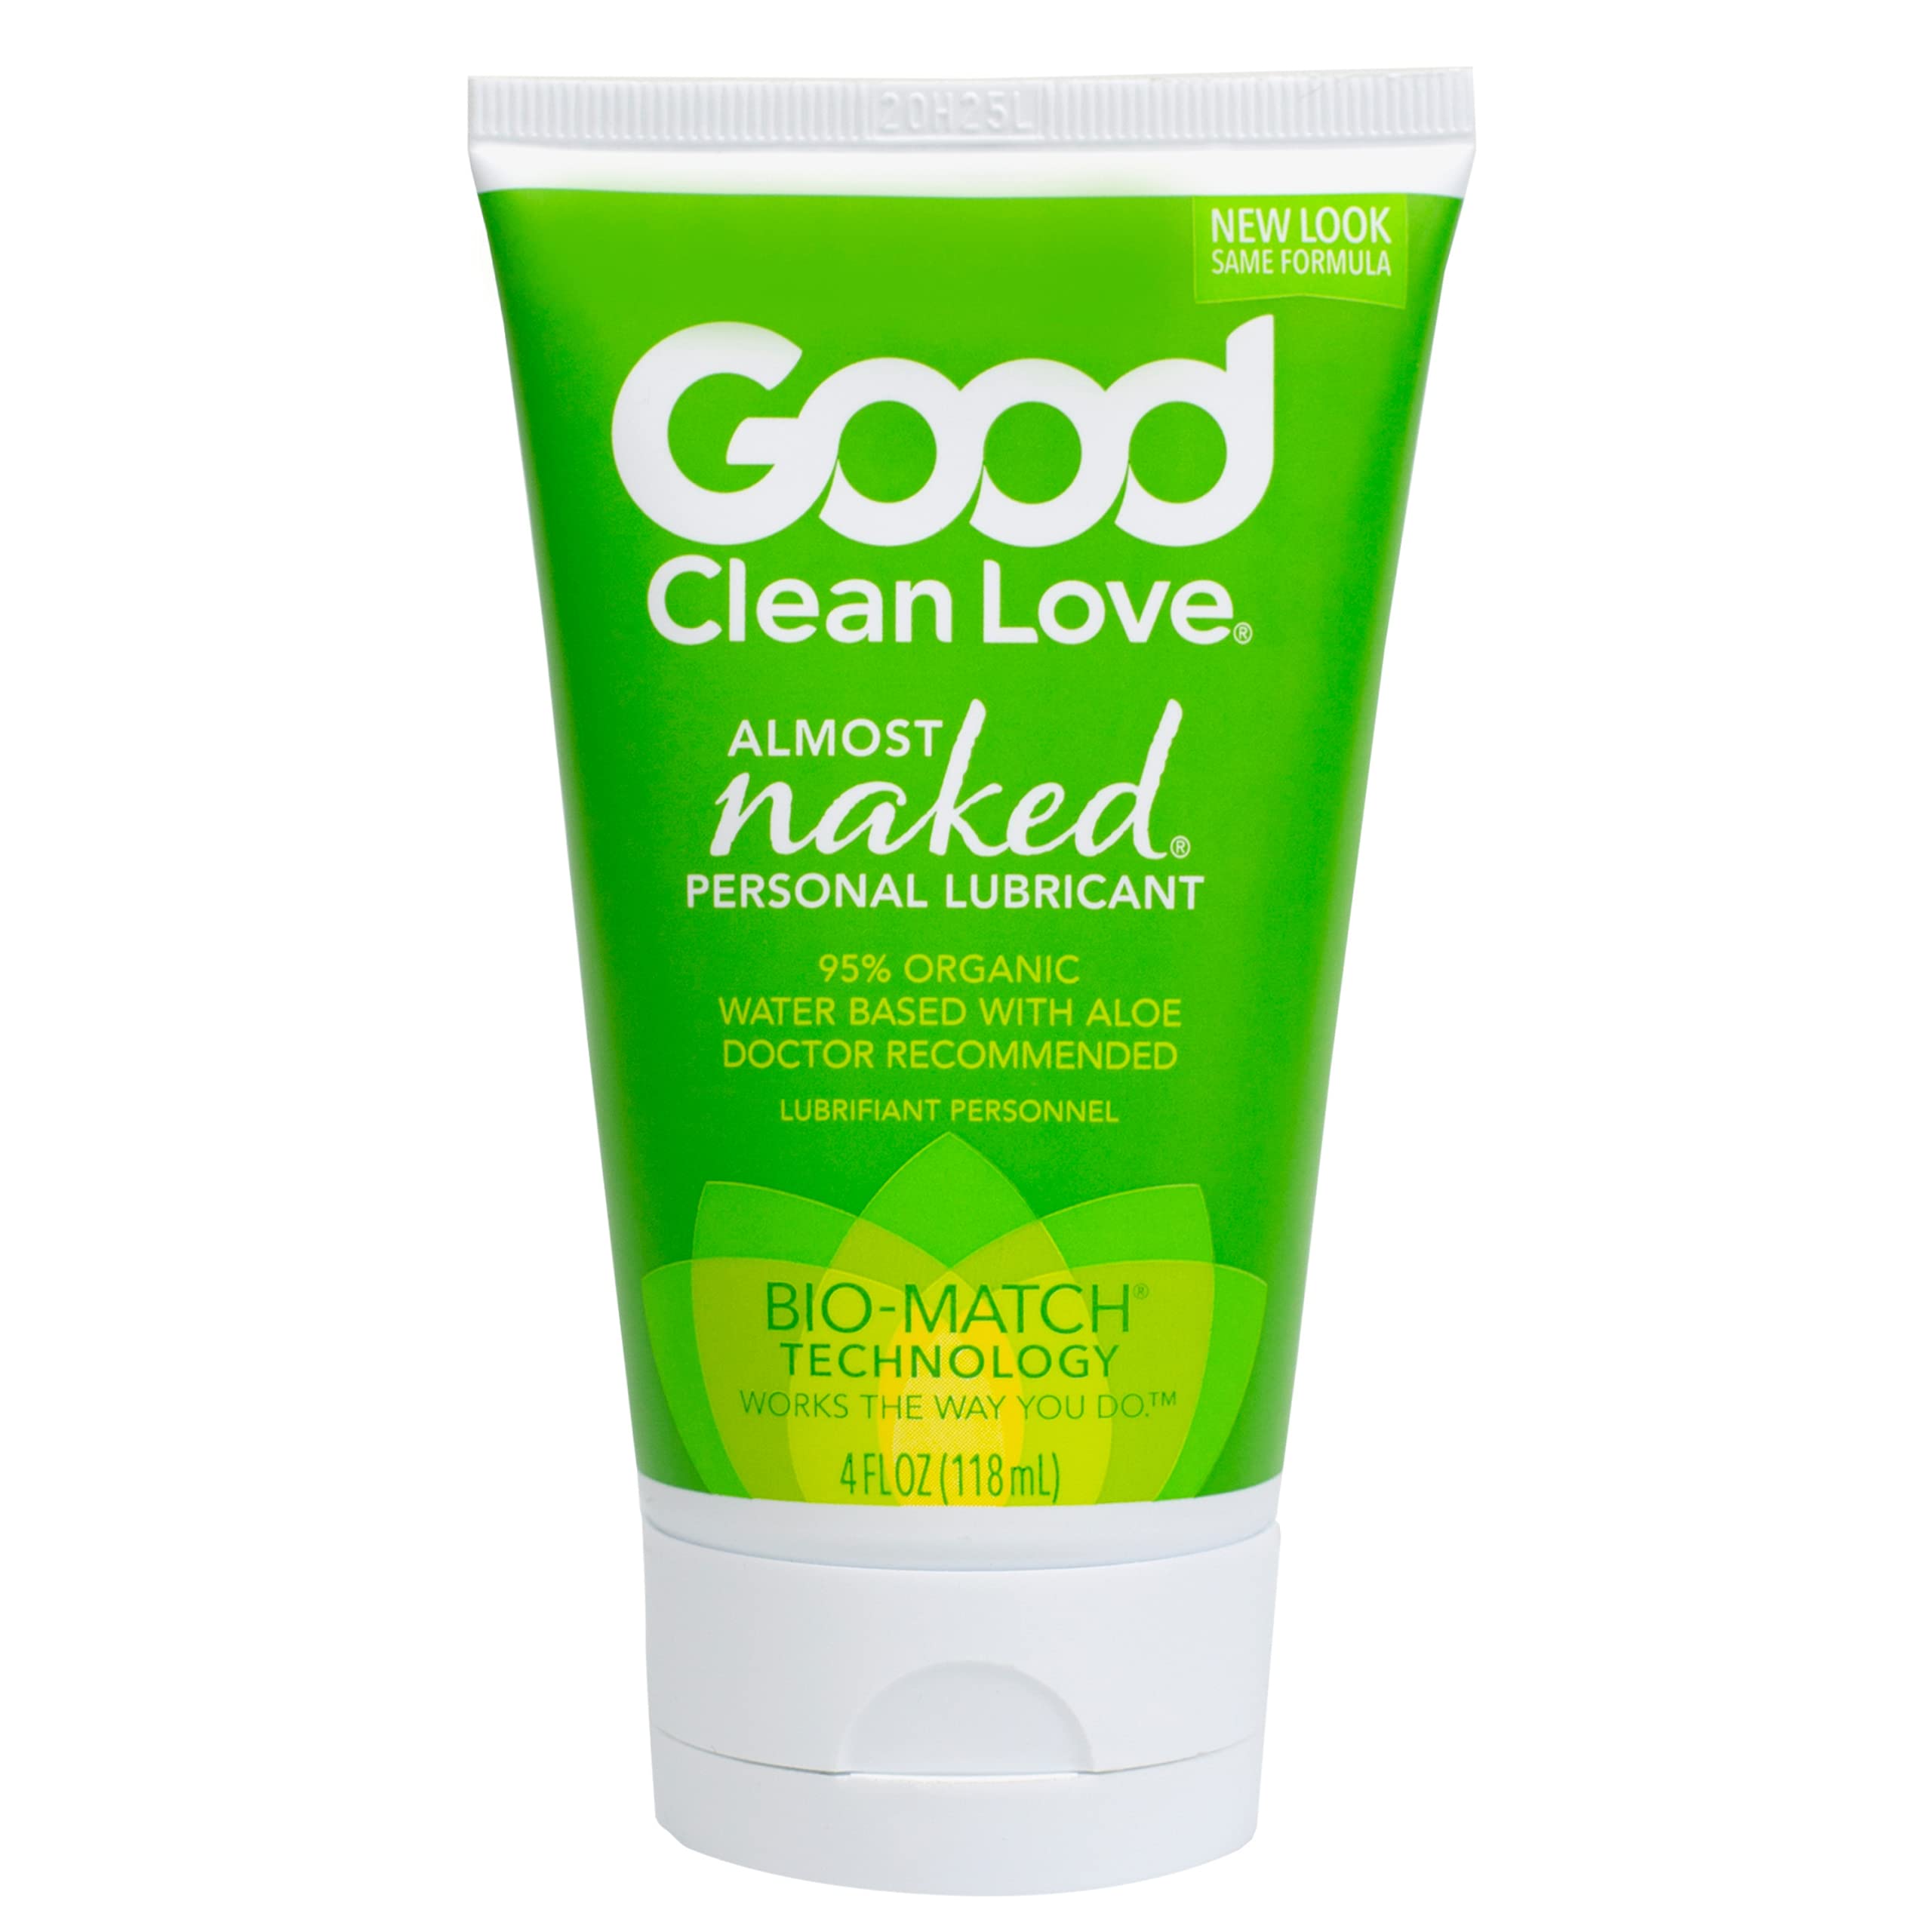 a green bottle of good clean love lubricant